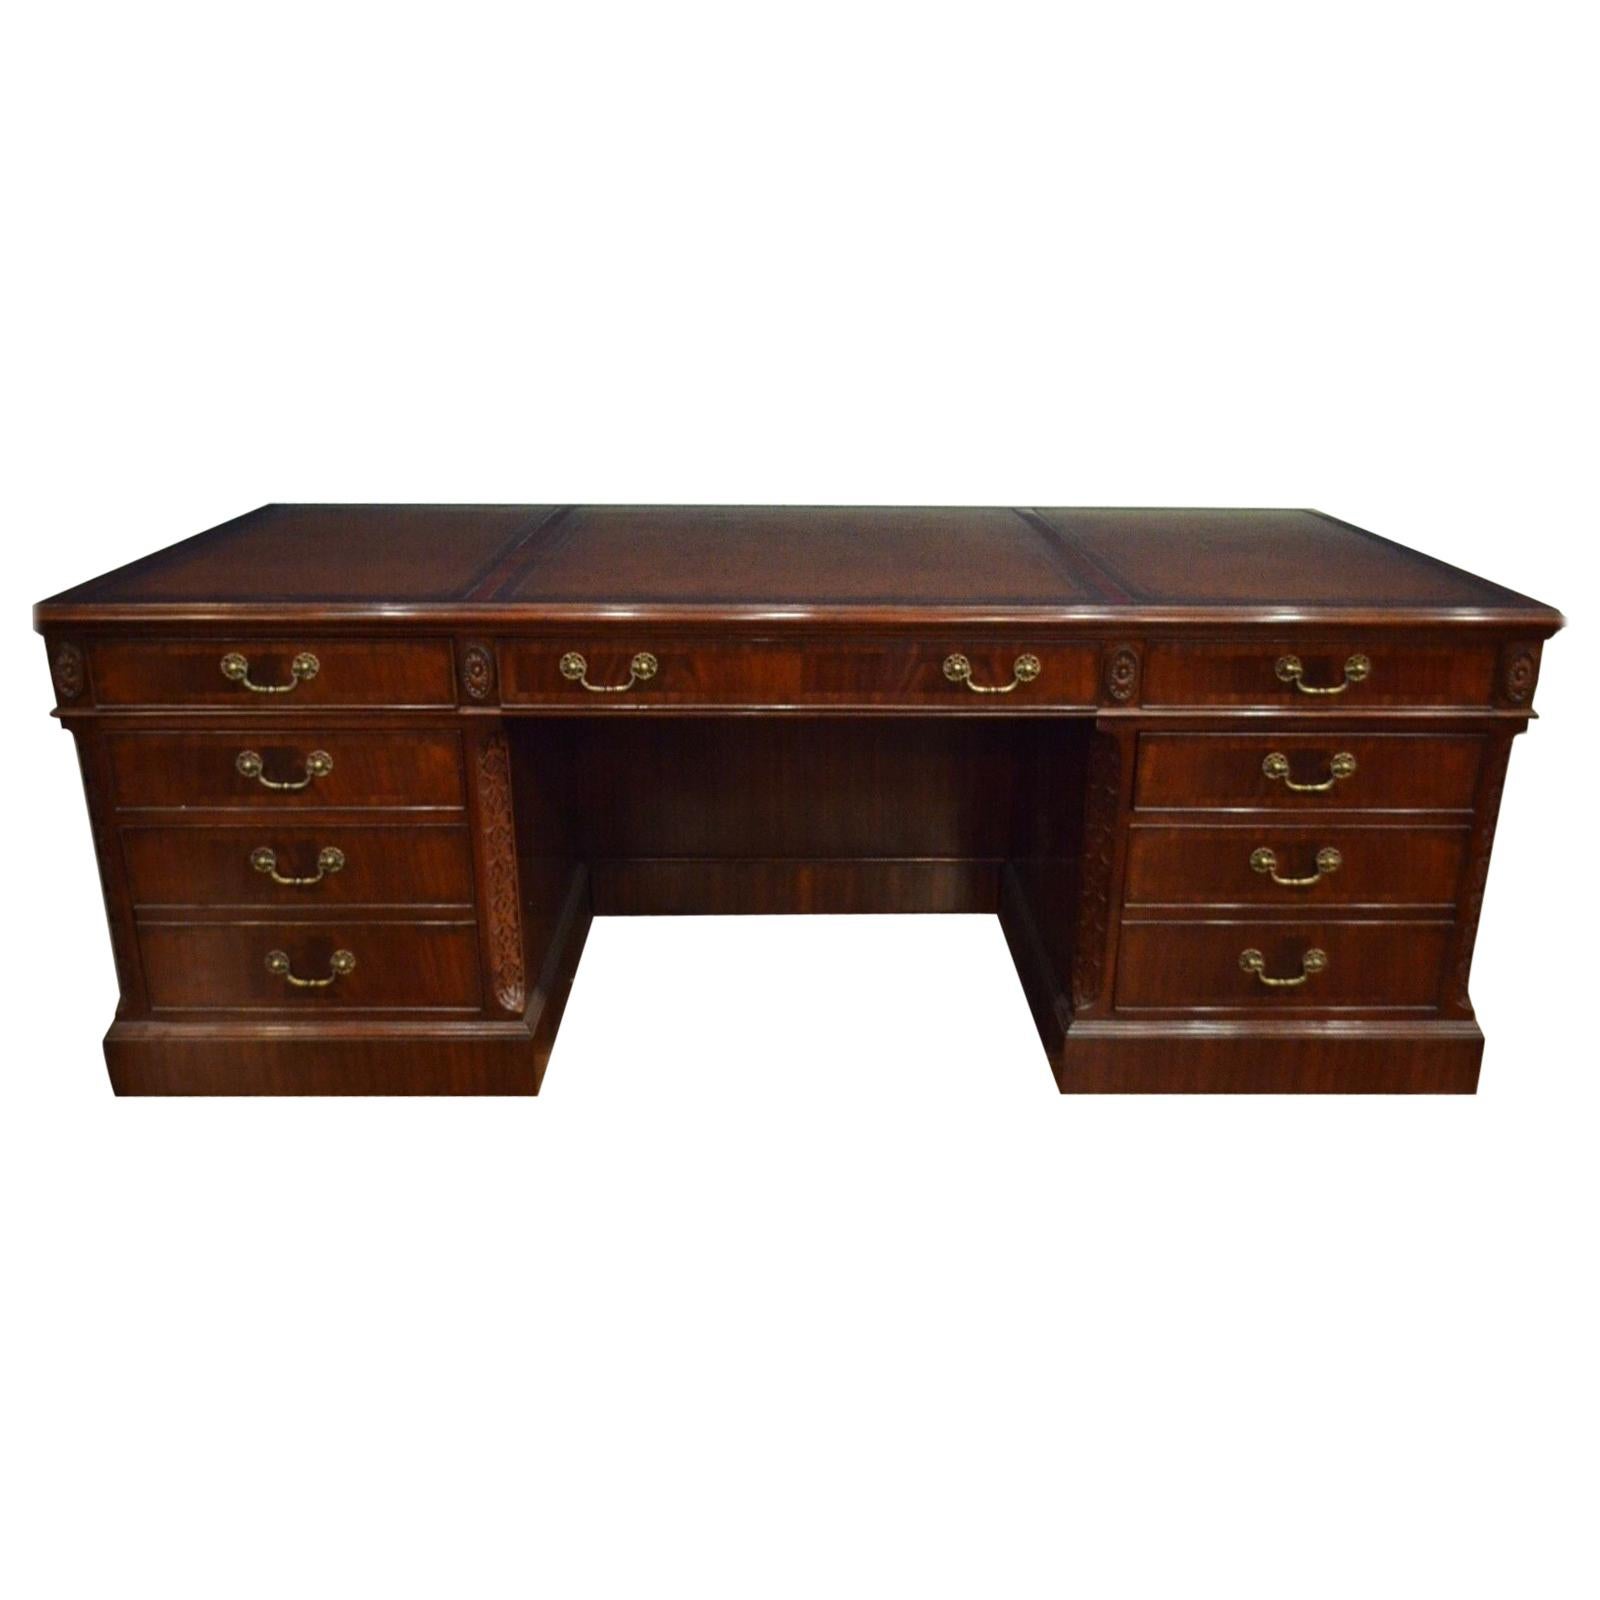 Large Mahogany Rectangular Conference Table by Leighton Hall For Sale at  1stDibs  traditional conference table, rectangular conference tables,  rectangle conference table